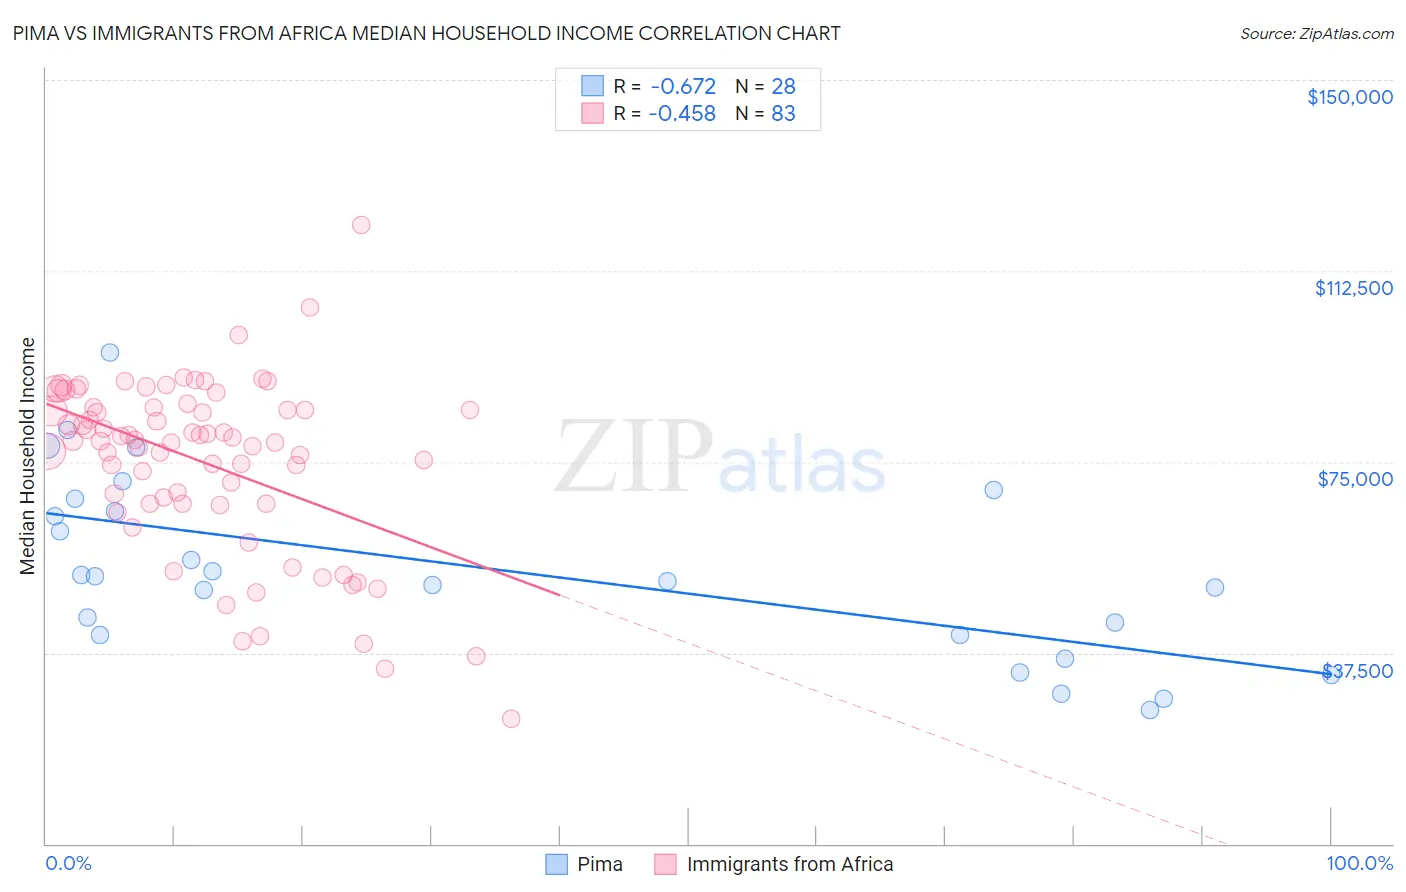 Pima vs Immigrants from Africa Median Household Income